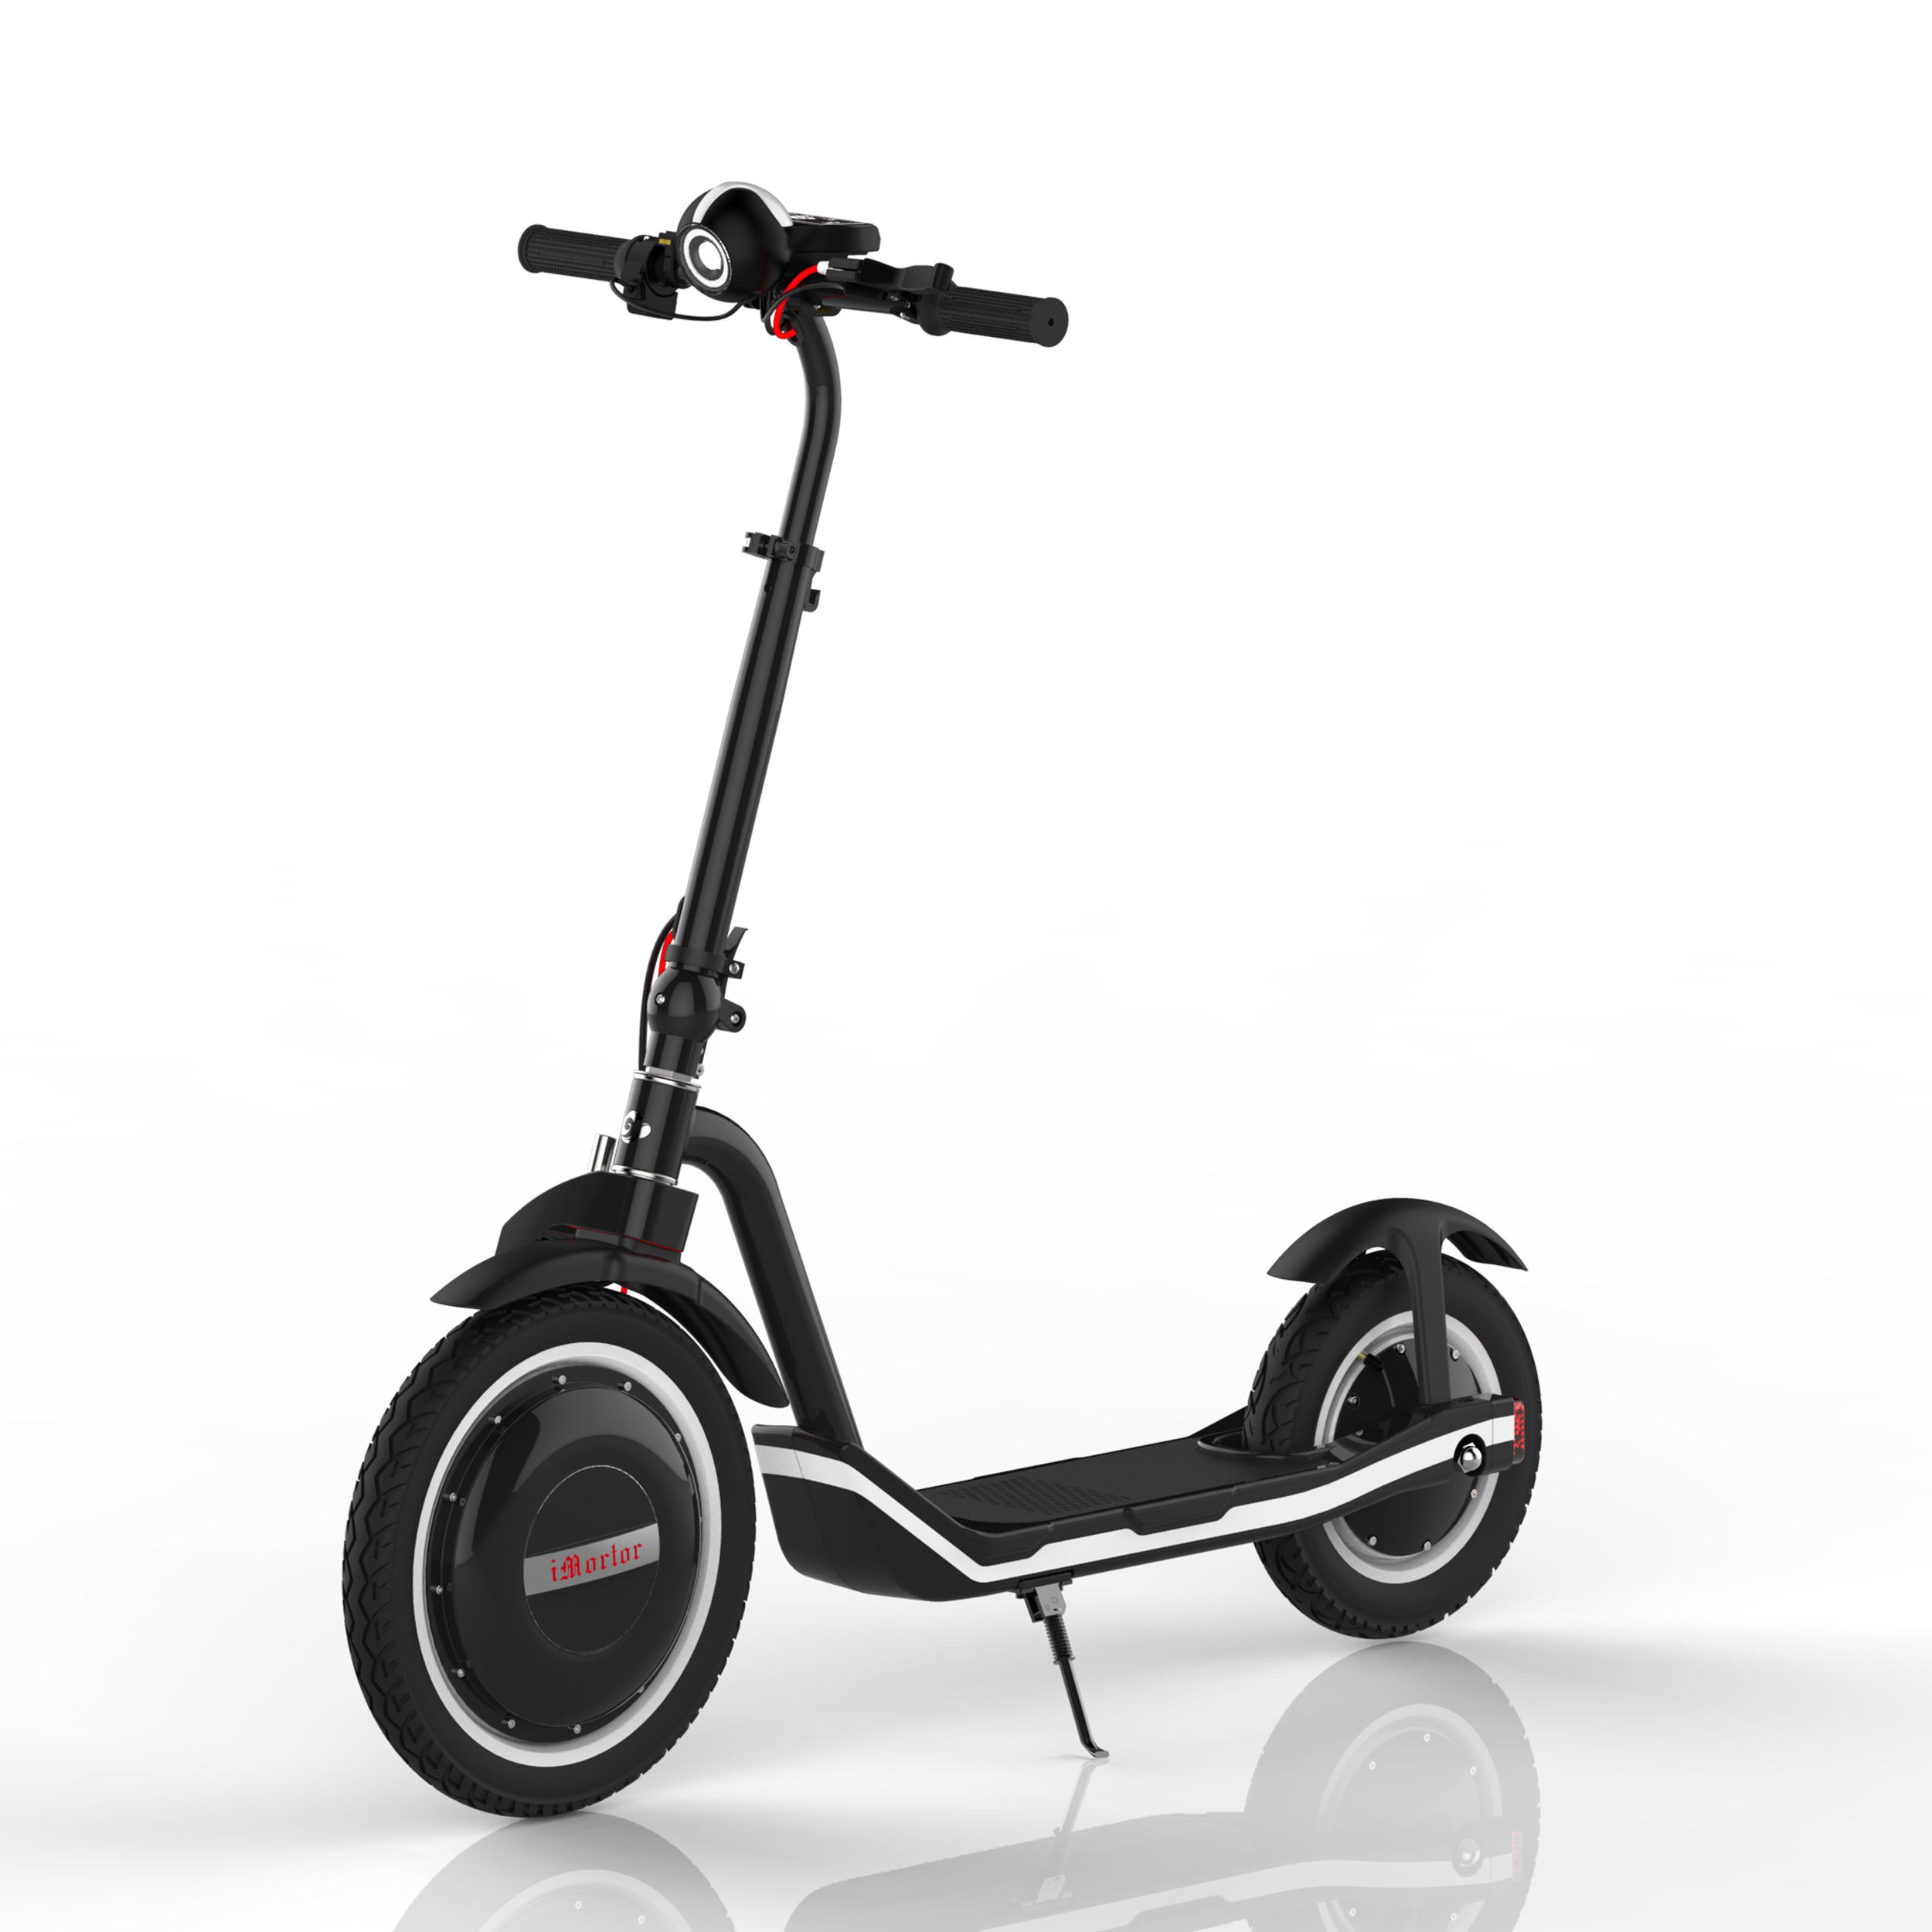 iMortor C1 9.6Ah 36V 350W Foldable Off-road Electric Scooter